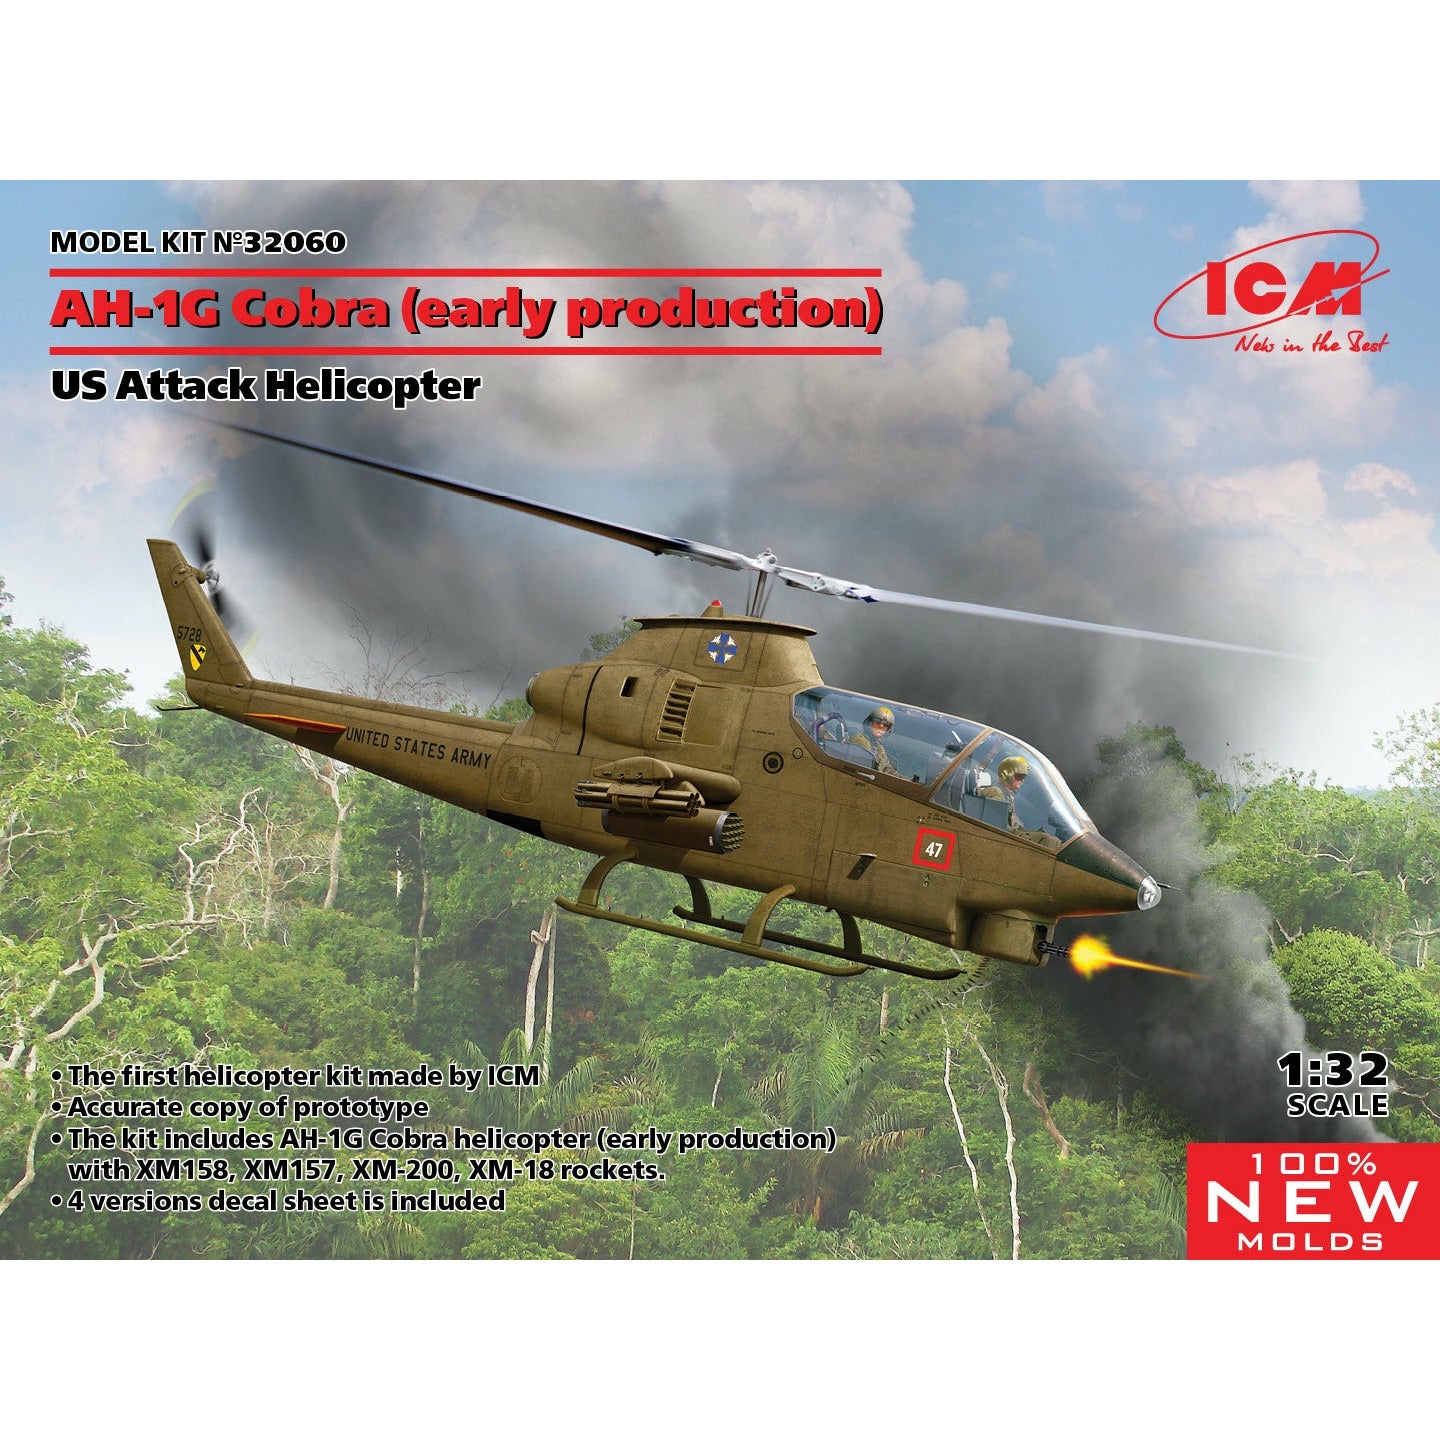 AH-1G Cobra (early production), US Attack Helicopter (100% new molds) 1/32 #32060 by ICM